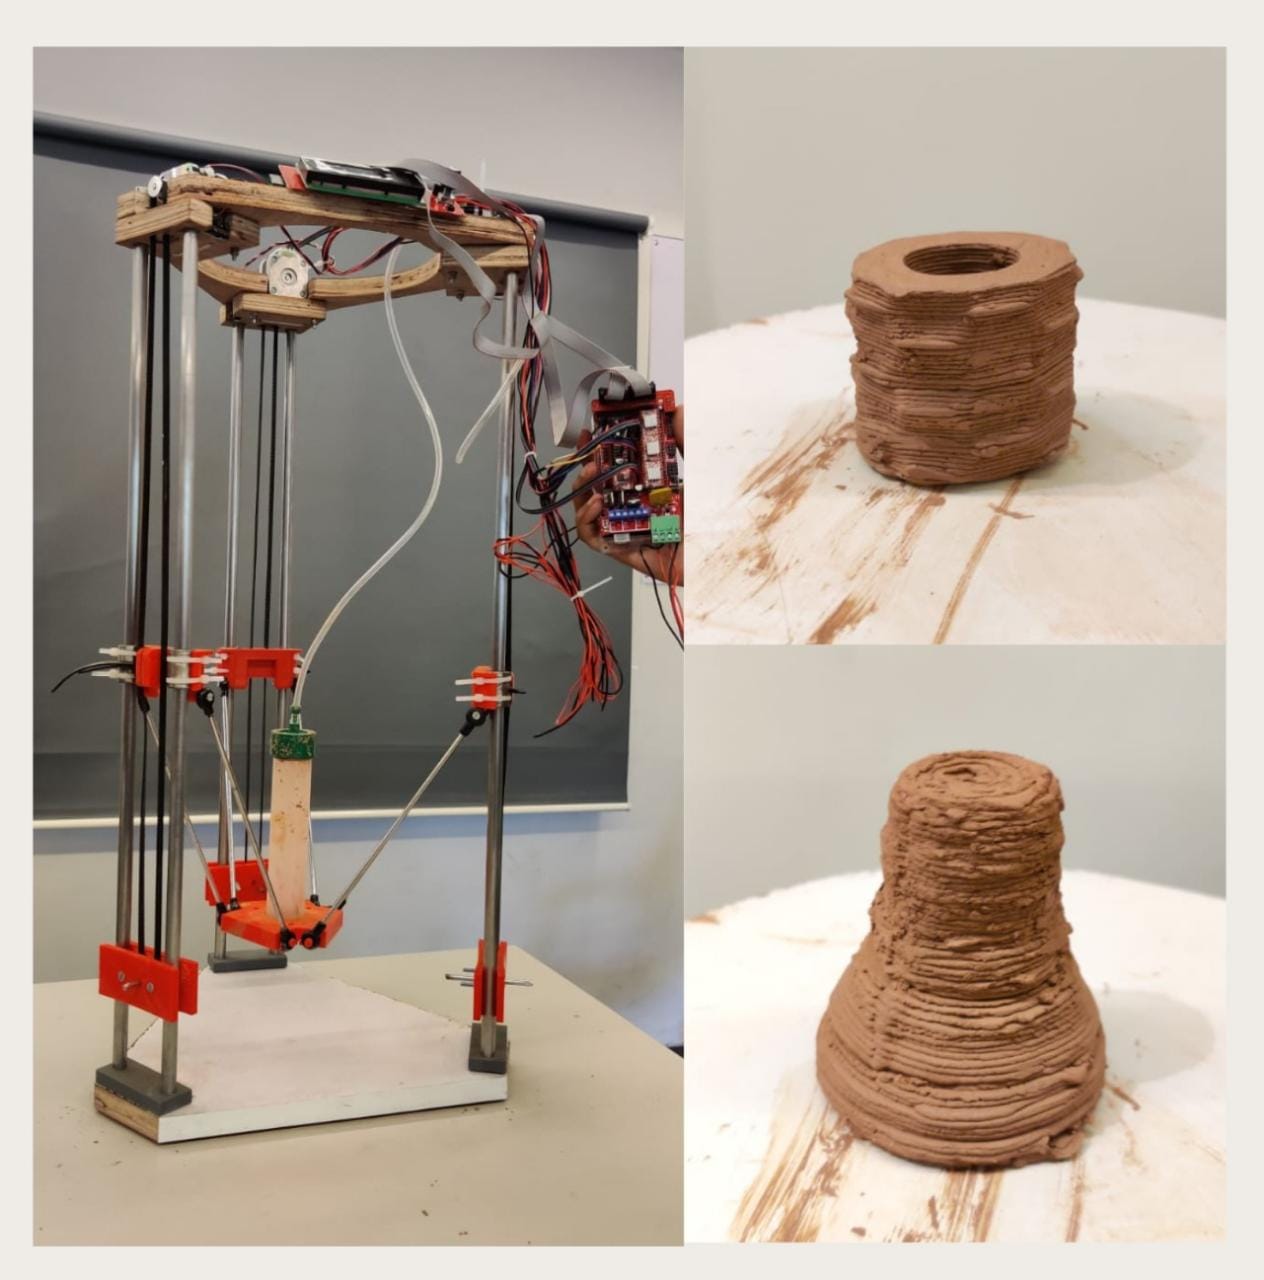 DY Patil of Engineering Student created 3D clay printer